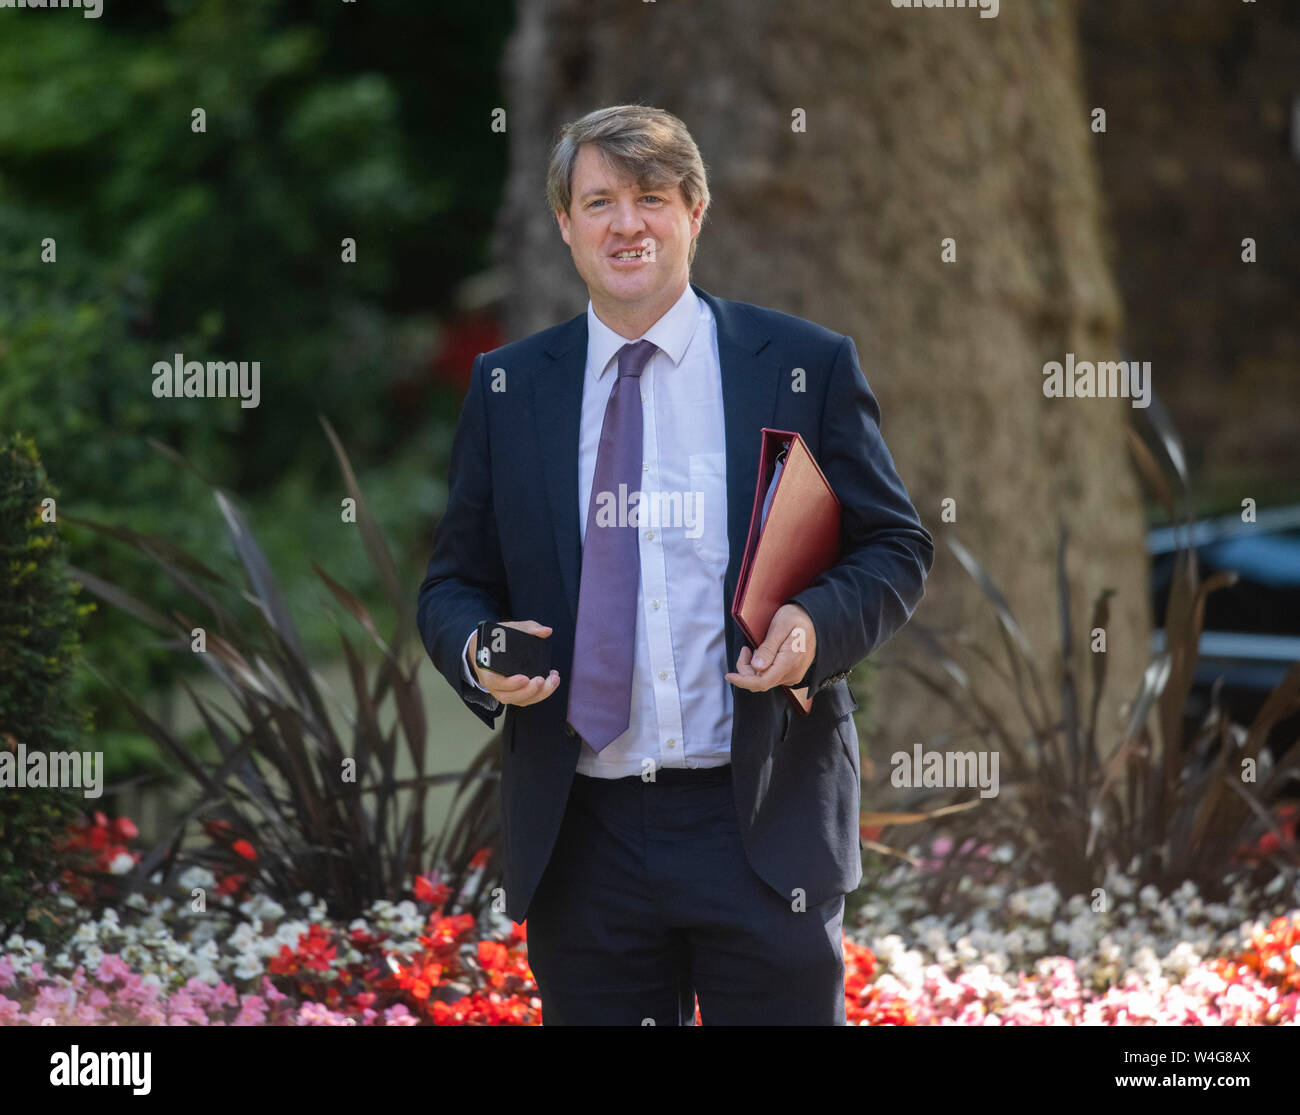 Downing Street, London, UK. 23rd July 2019. Chris Skidmore, Minister of State for Universities, Science, Research and Innovation arrives in Downing Street for final cabinet meeting before Boris Johnson is announced as new PM. He takes phone photos of the large press contingent. Credit: Malcolm Park/Alamy Live News. Stock Photo